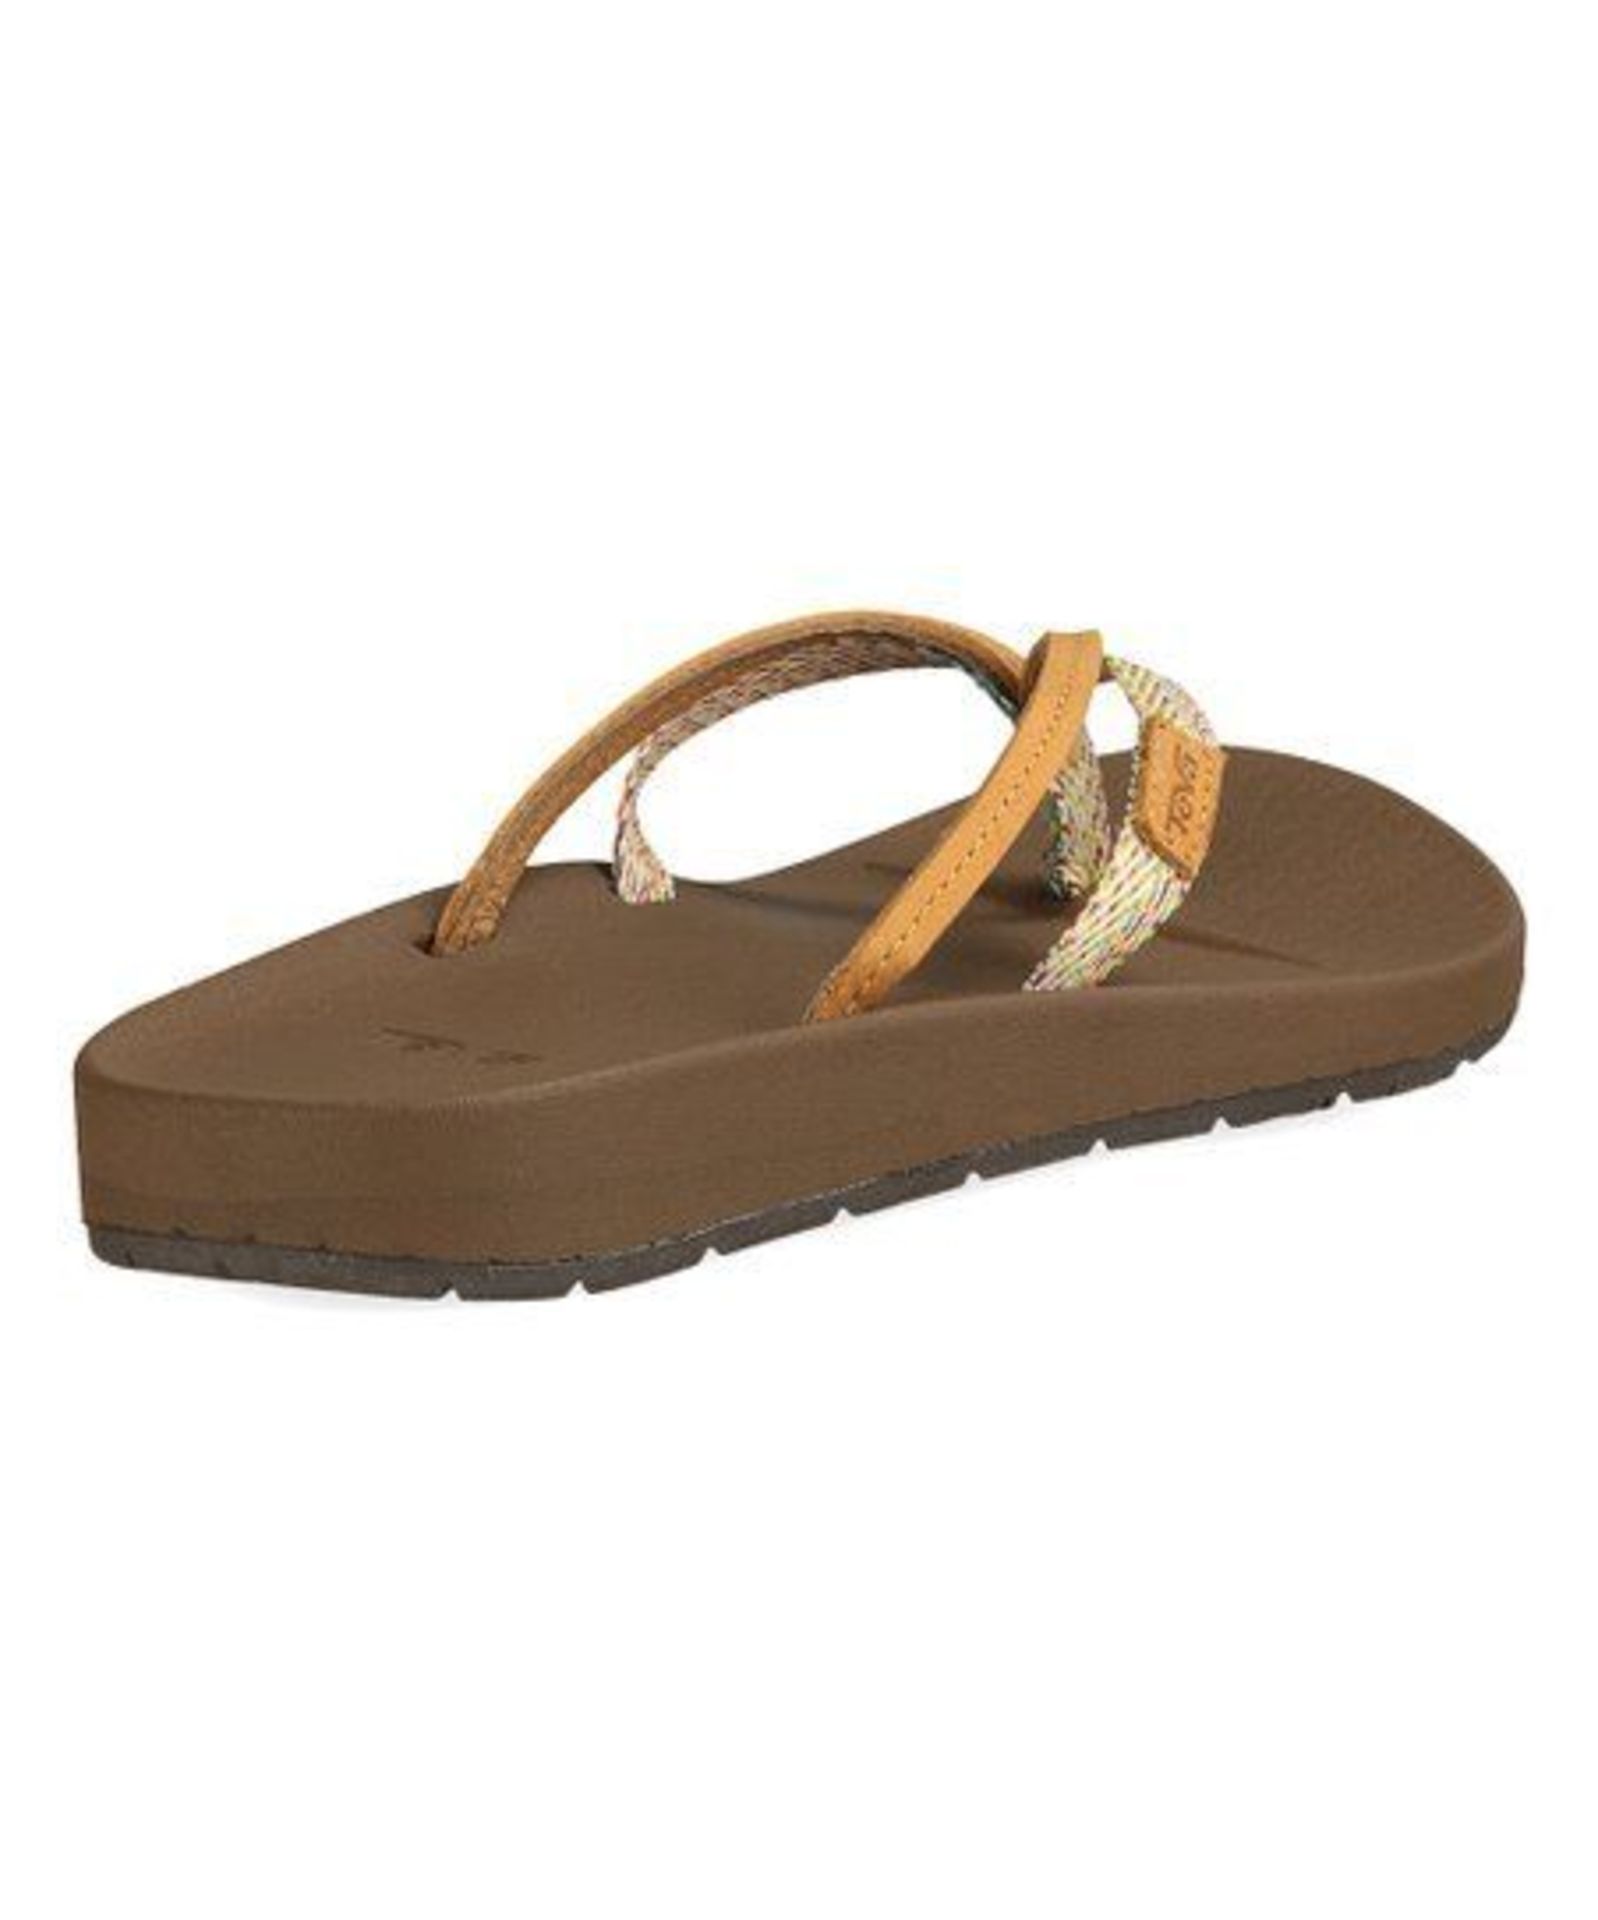 Teva Tan Azure 2-Strap Flip-Flop Uk Size:4 (New With Box) [Ref: 54275435-B-002-Tf] - Image 4 of 5